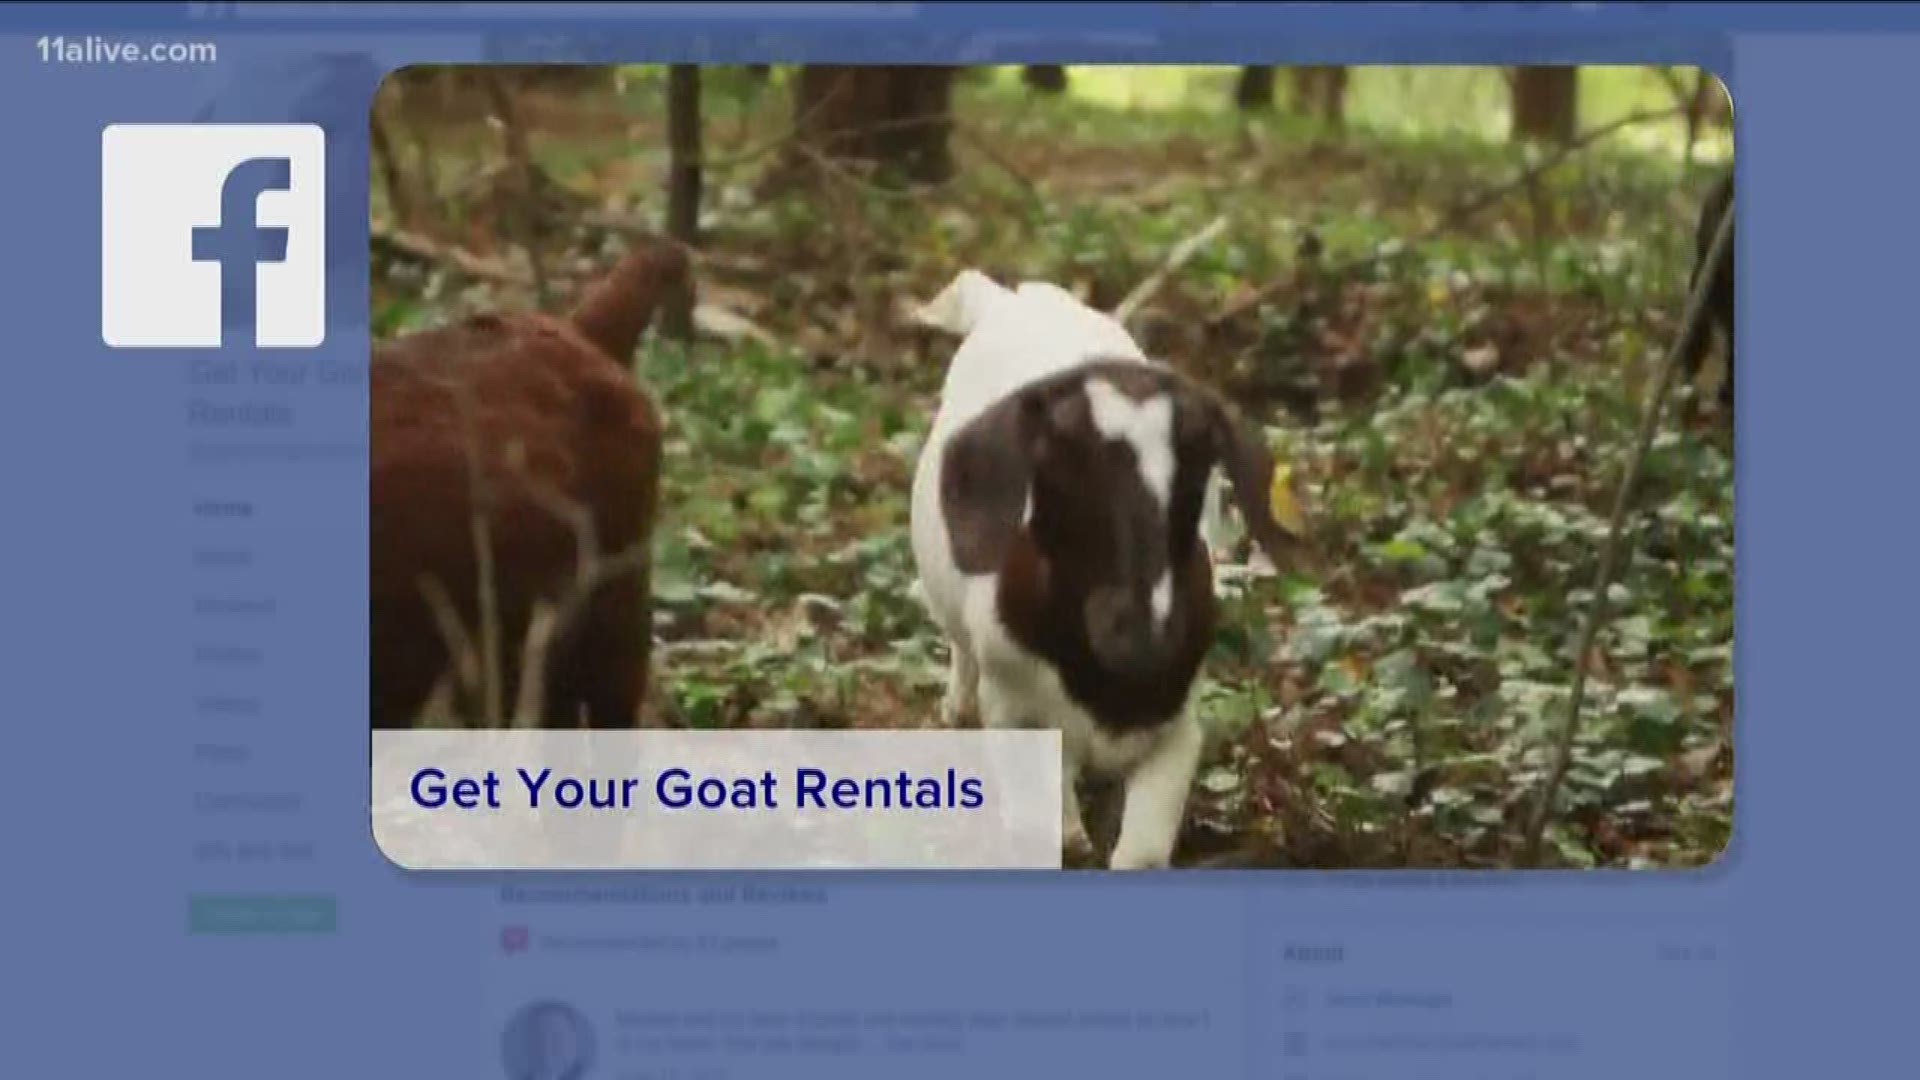 Get Your Goats Rentals will have some of its goats featured in a Had and Shoulders commercial.